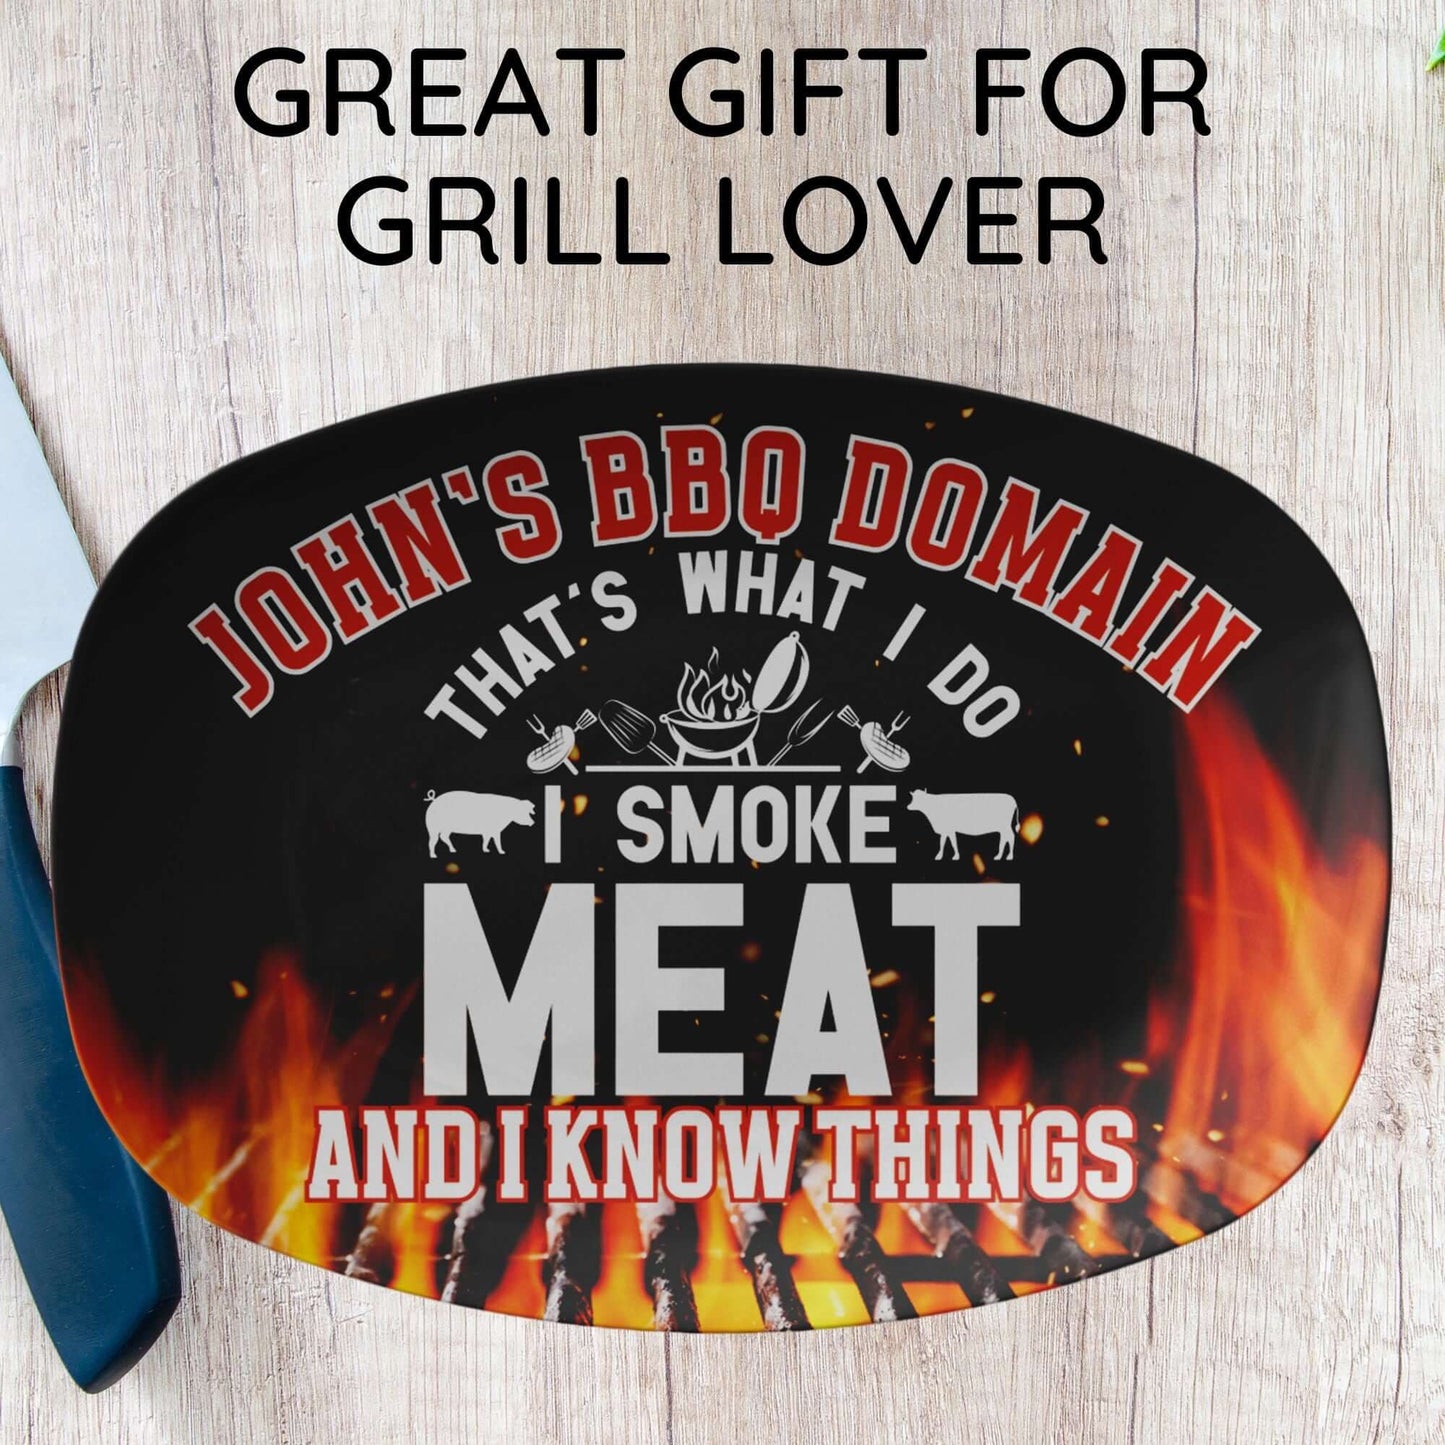 Personalized Grilling Platter, Custom BBQ Grill Plate Gifts For Him